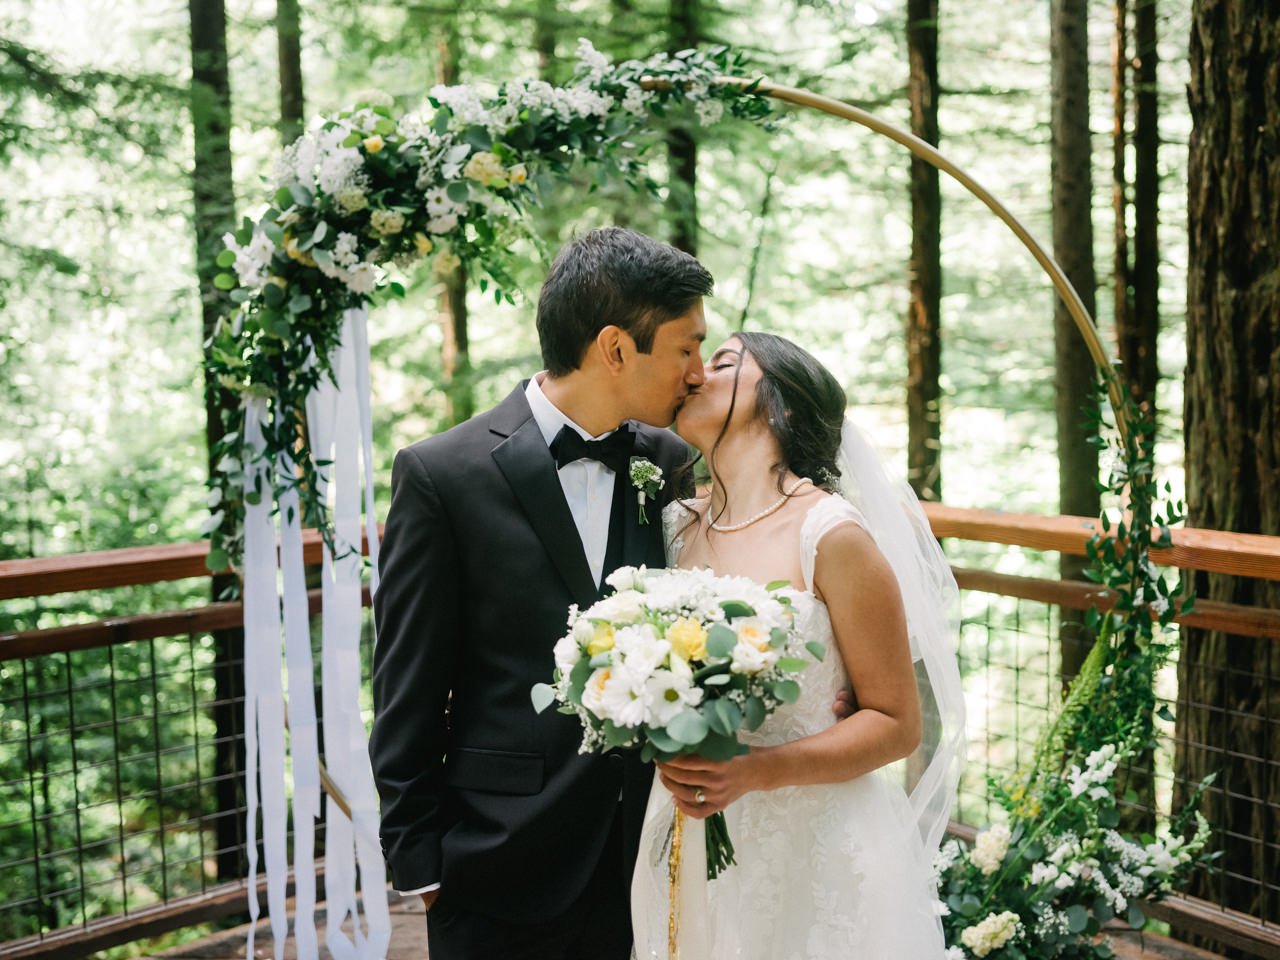  Indian bride and groom kiss in forest wedding ceremony 